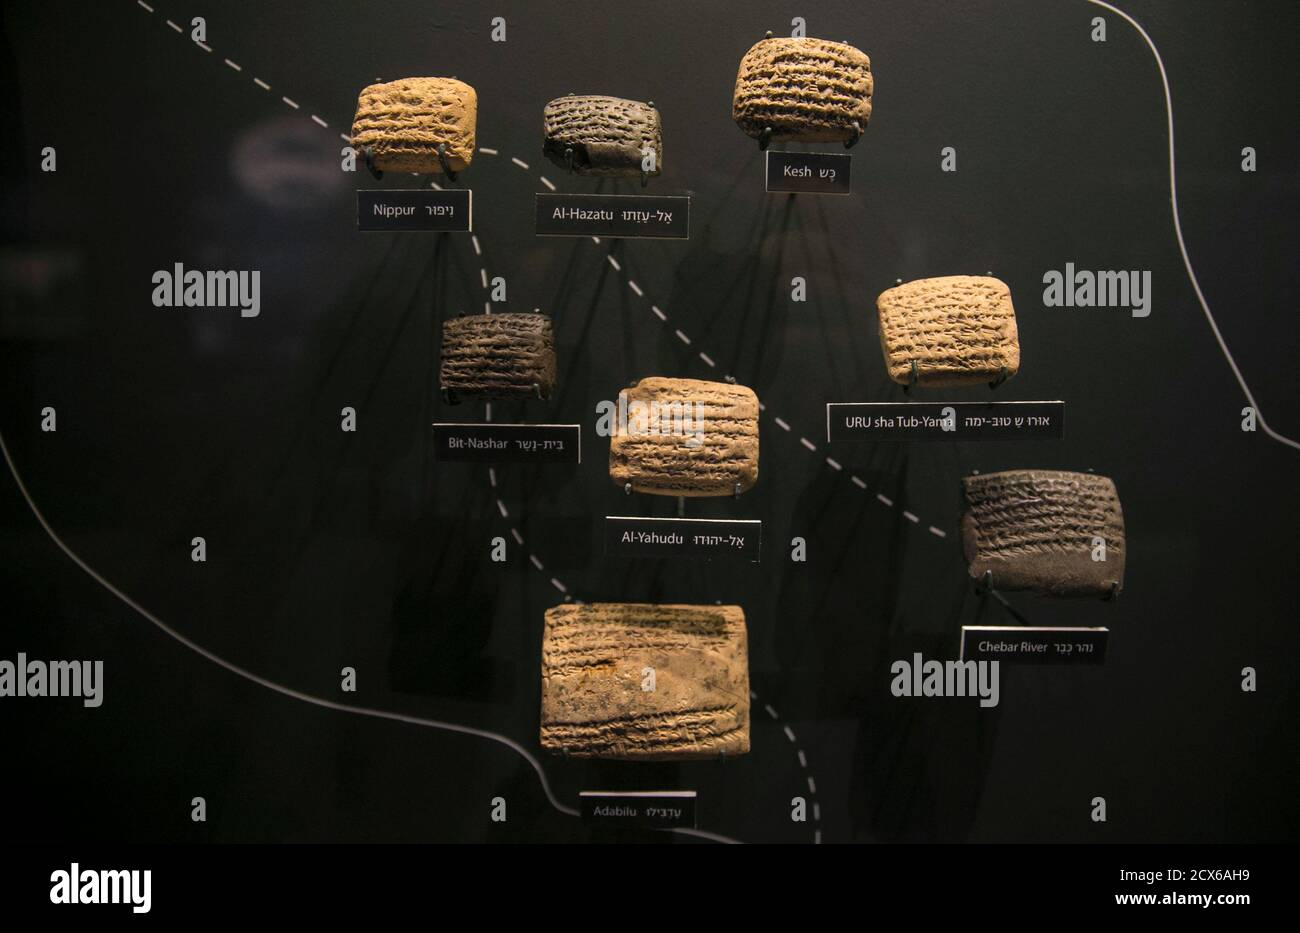 Cuneiform tablets are displayed during an exhibition at the Bible Lands Museum in Jerusalem, February 3, 2015. The exhibition of ancient clay tablets from modern-day Iraq is shedding light for the first time on the daily lives of Jews who were exiled to Babylon from Jerusalem some 2,500 years ago.The exhibition is based on more than 100 cuneiform tablets, each no bigger than an adult's palm, that detail transactions and contracts between Judeans driven out of or convinced to move from Jerusalem by King Nebuchadnezzar in 600 BC. REUTERS/Baz Ratner (JERUSALEM - Tags: SOCIETY) Stock Photo